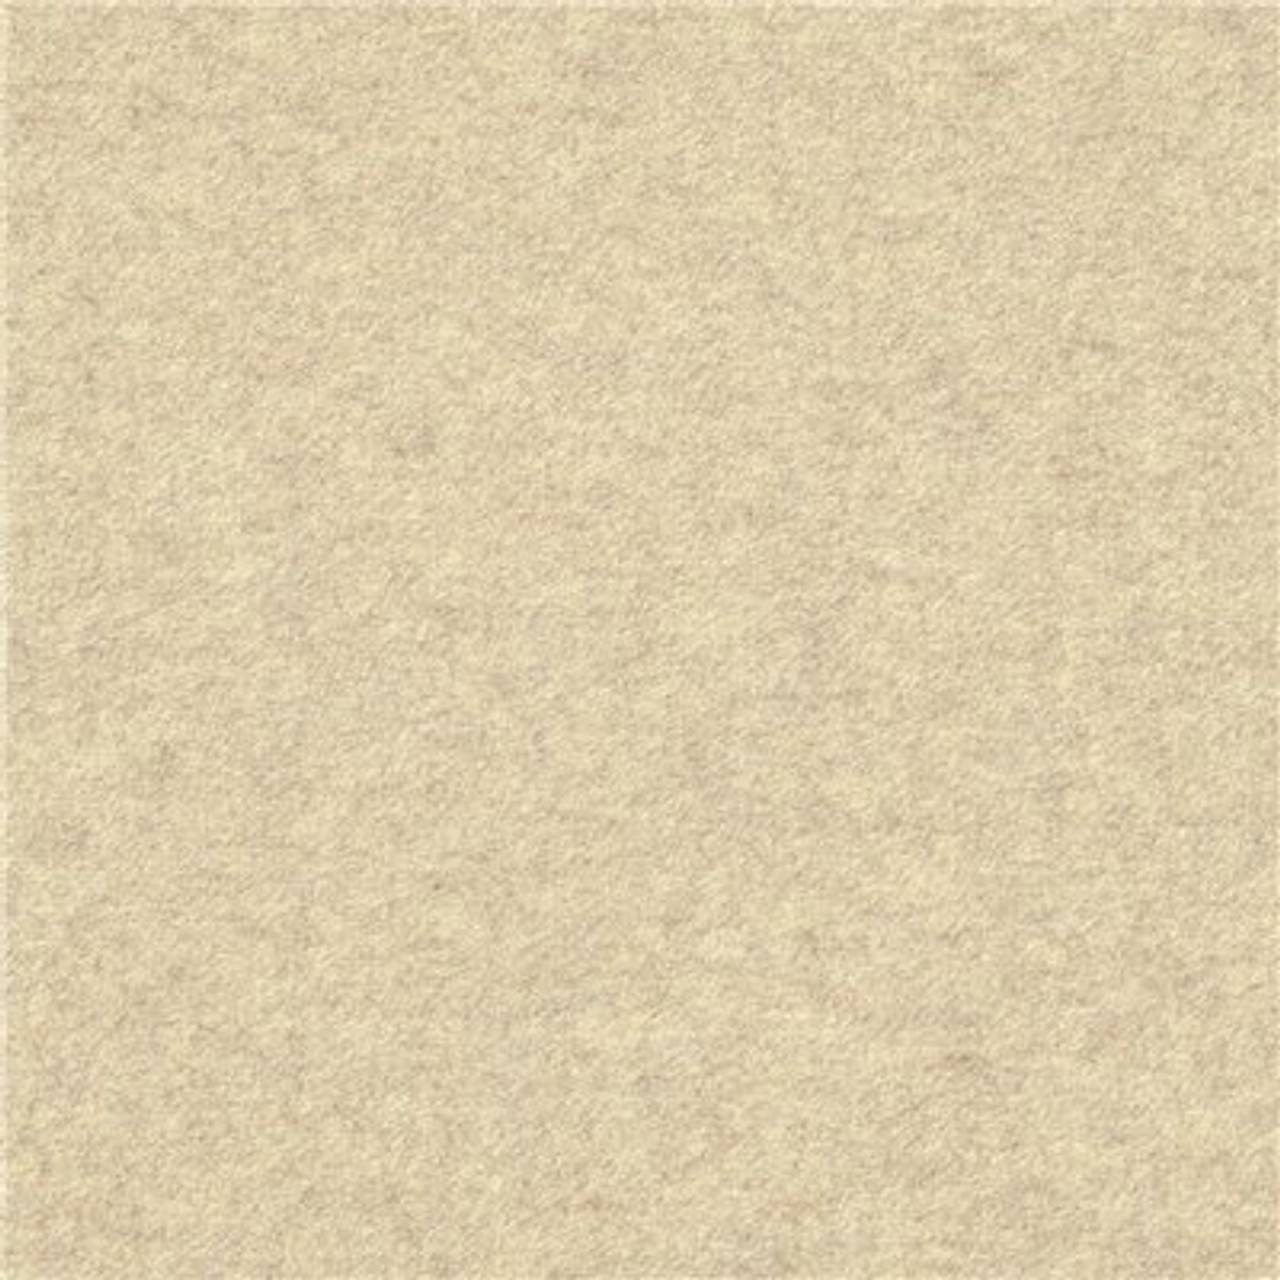 Foss Peel And Stick First Impressions Flat Ivory 24 In. X 24 In. Commercial Carpet Tile (15 Tiles/Case)